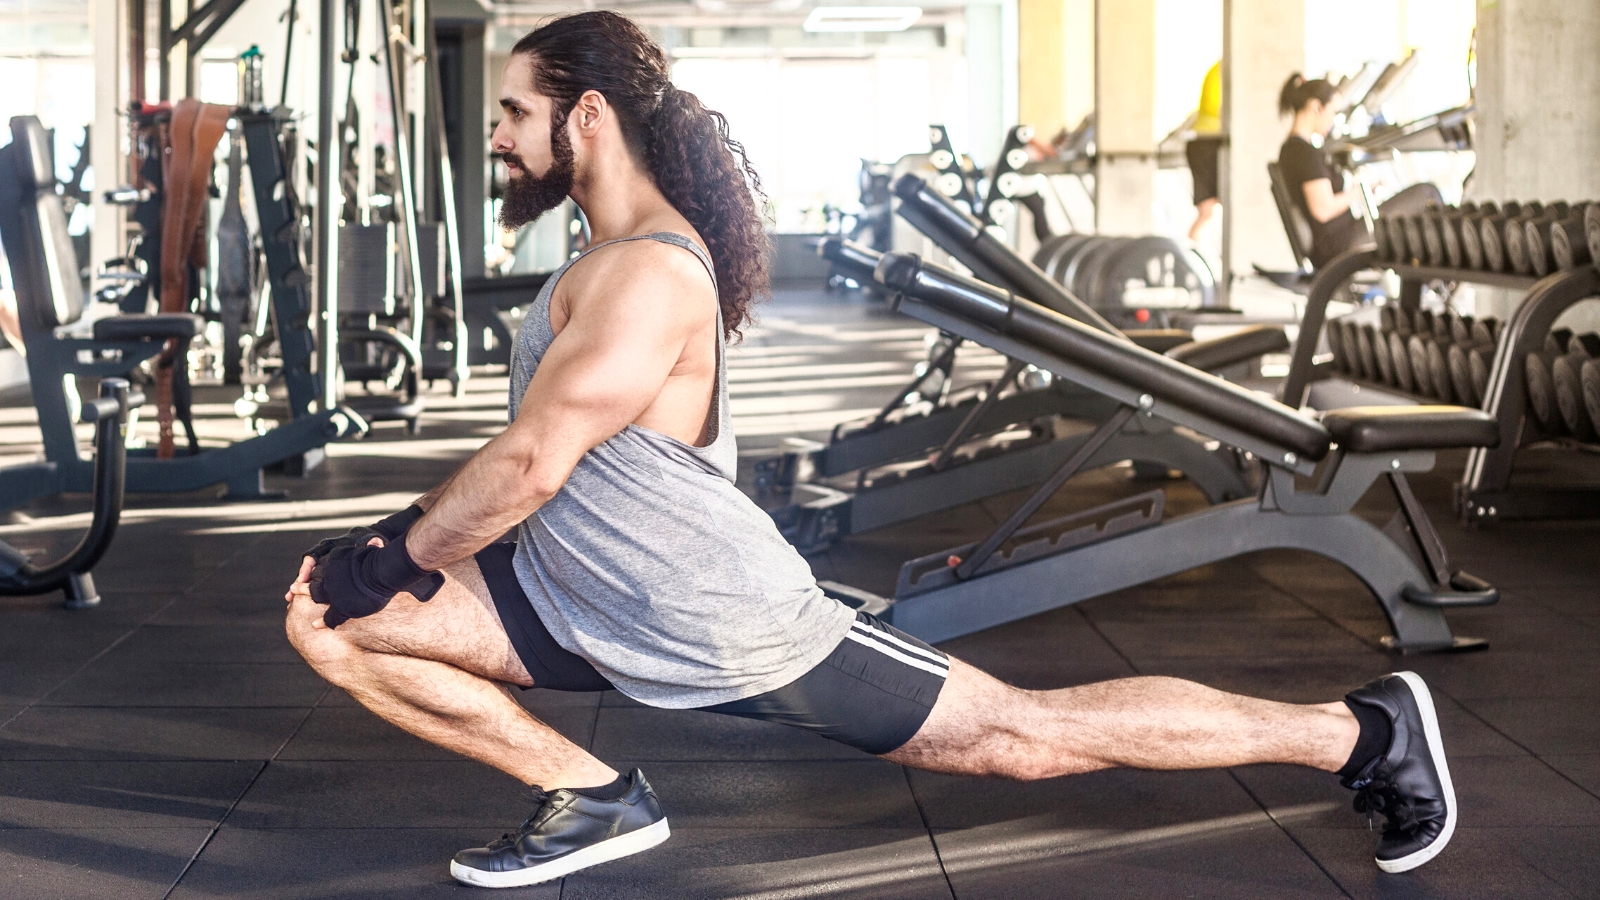 Try This Squat Exercise Modification If You're Super Inflexible